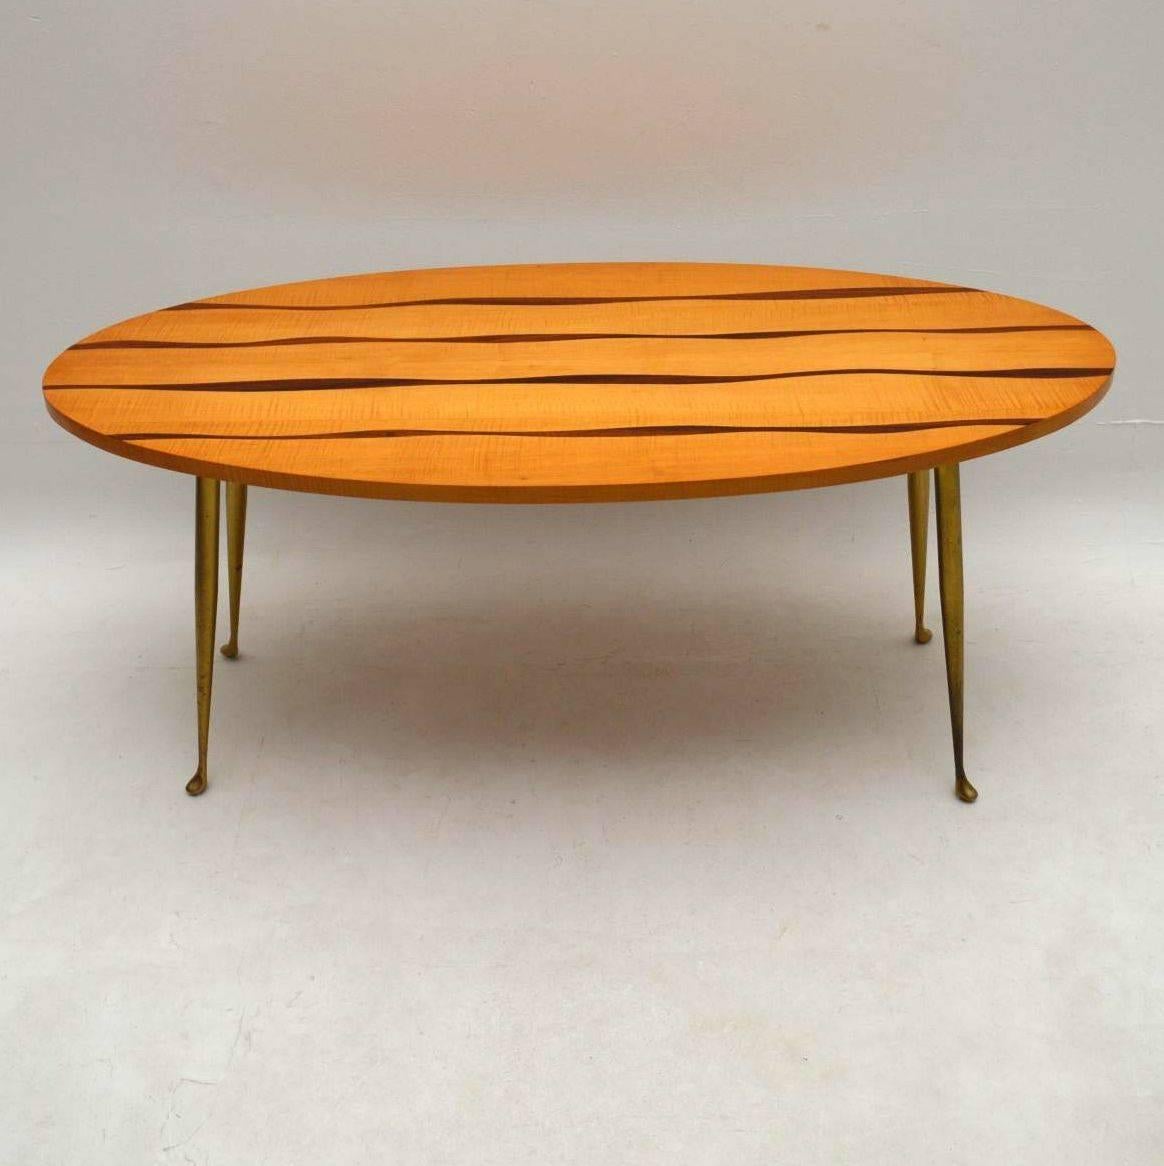 A beautiful and very unusual coffee table from the 1950s, this was imported from Italy. It has a gorgeous design, with an oval top that's made from Satin Wood, and very interesting exotic wood inlay. The table sits on lovely brass legs. We have had